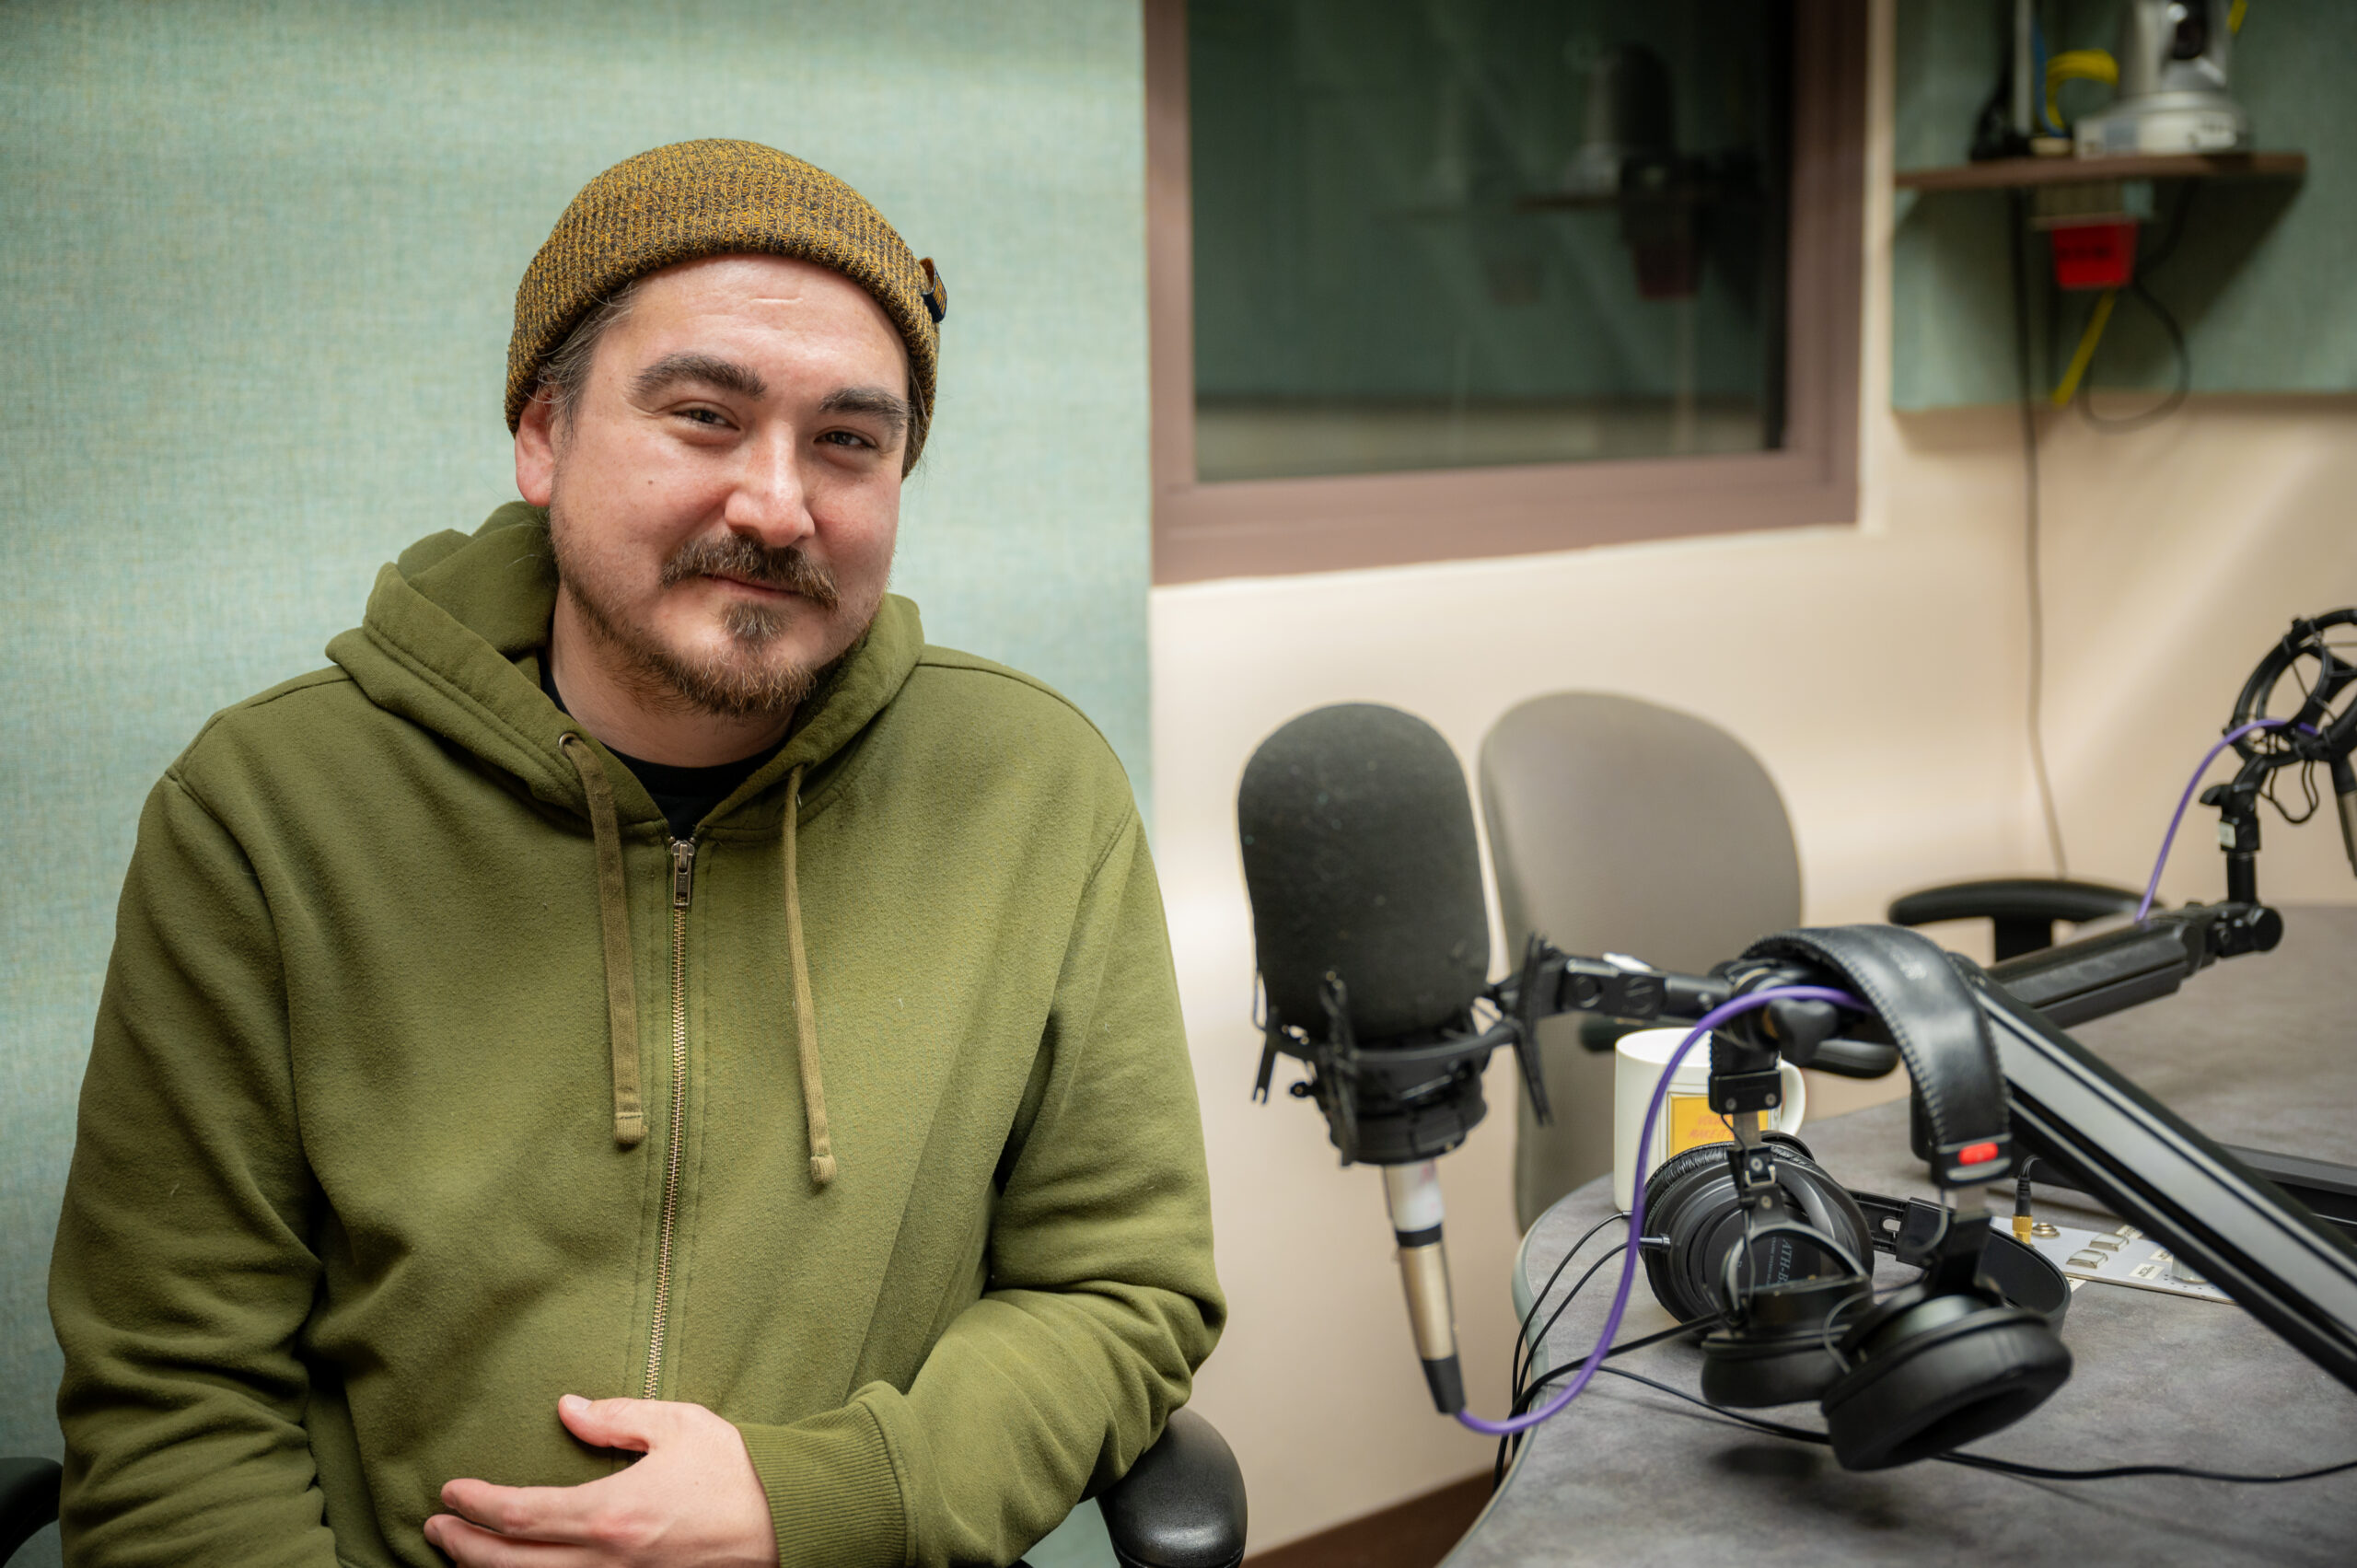 a man with a beanie hat on sits by a studio microphone.